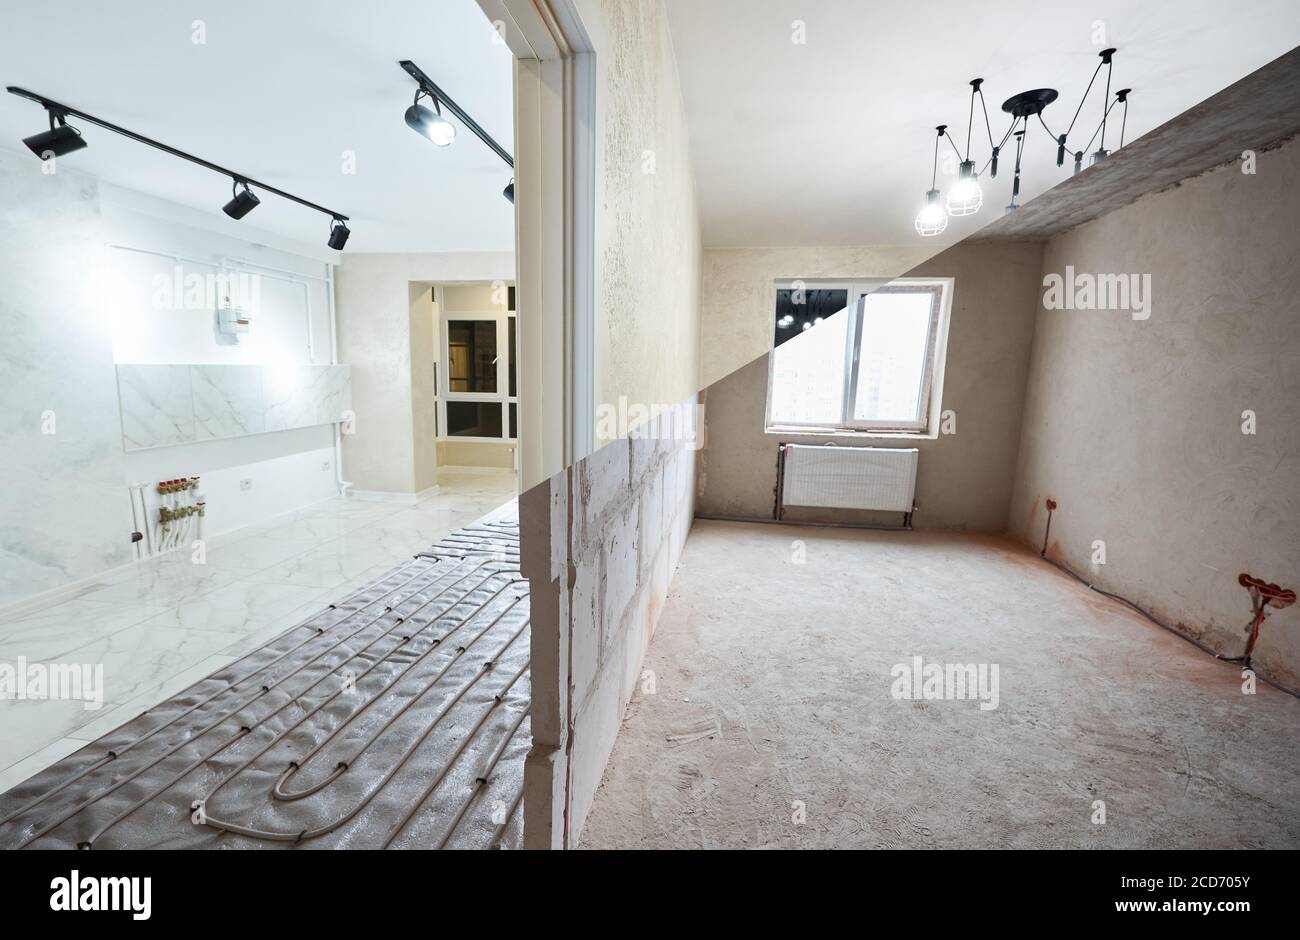 Empty rooms with large plastic window, heating radiators and underfloor heating pipes before and after restoration. Comparison of old apartment and new renovated place. Concept of home refurbishment. Stock Photo